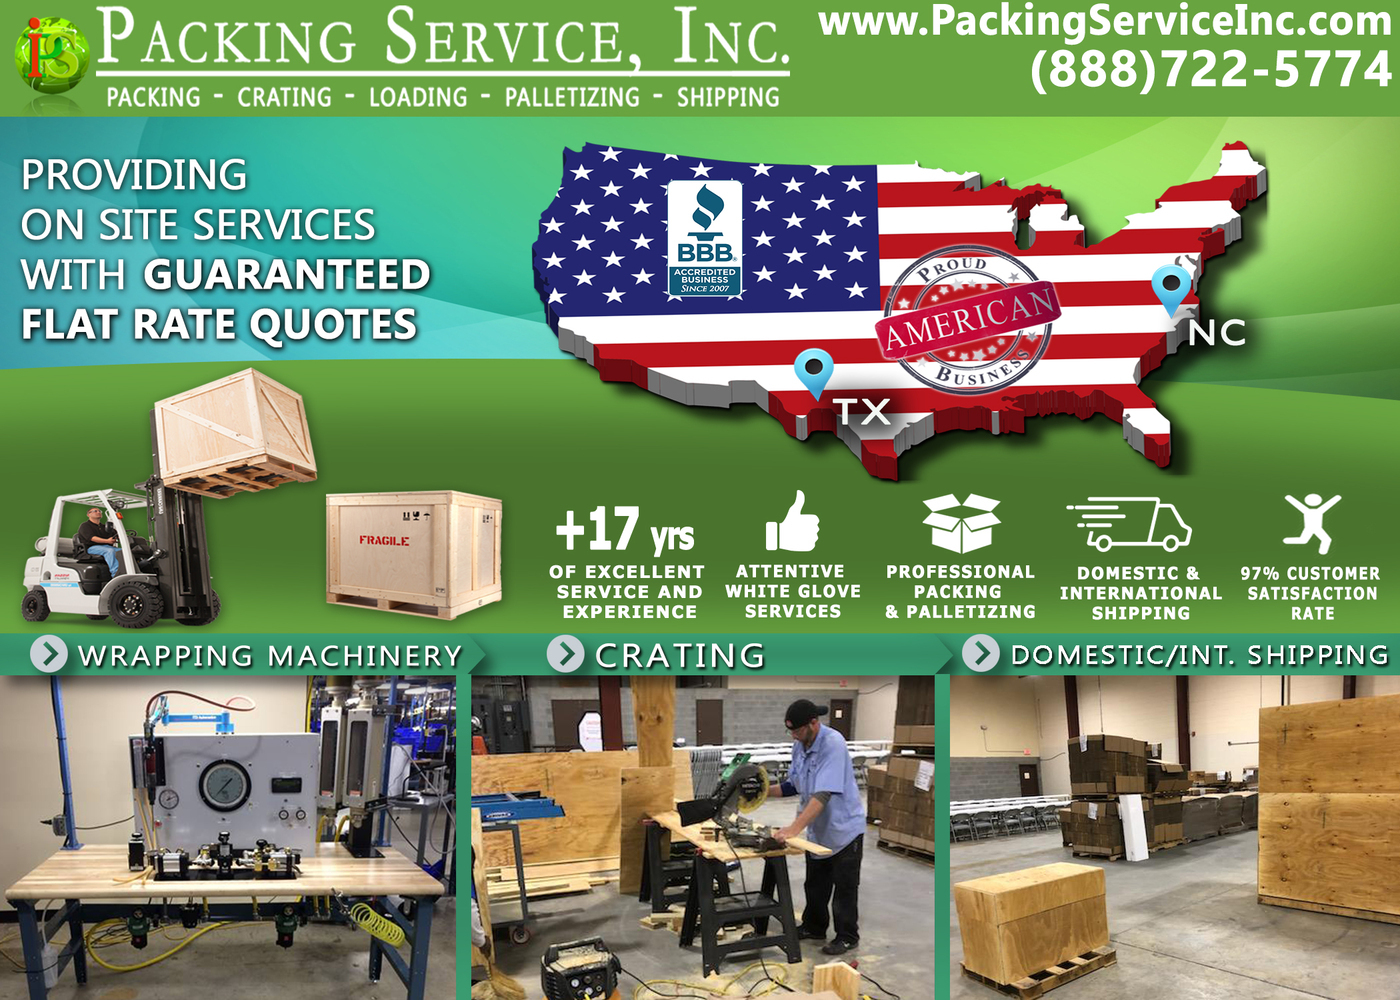 Packing Service Inc. is a professional packing and shipping services company offering full-scale packing, loading, crating, palletizing, and shipping services to almost all the cities and states in the USA